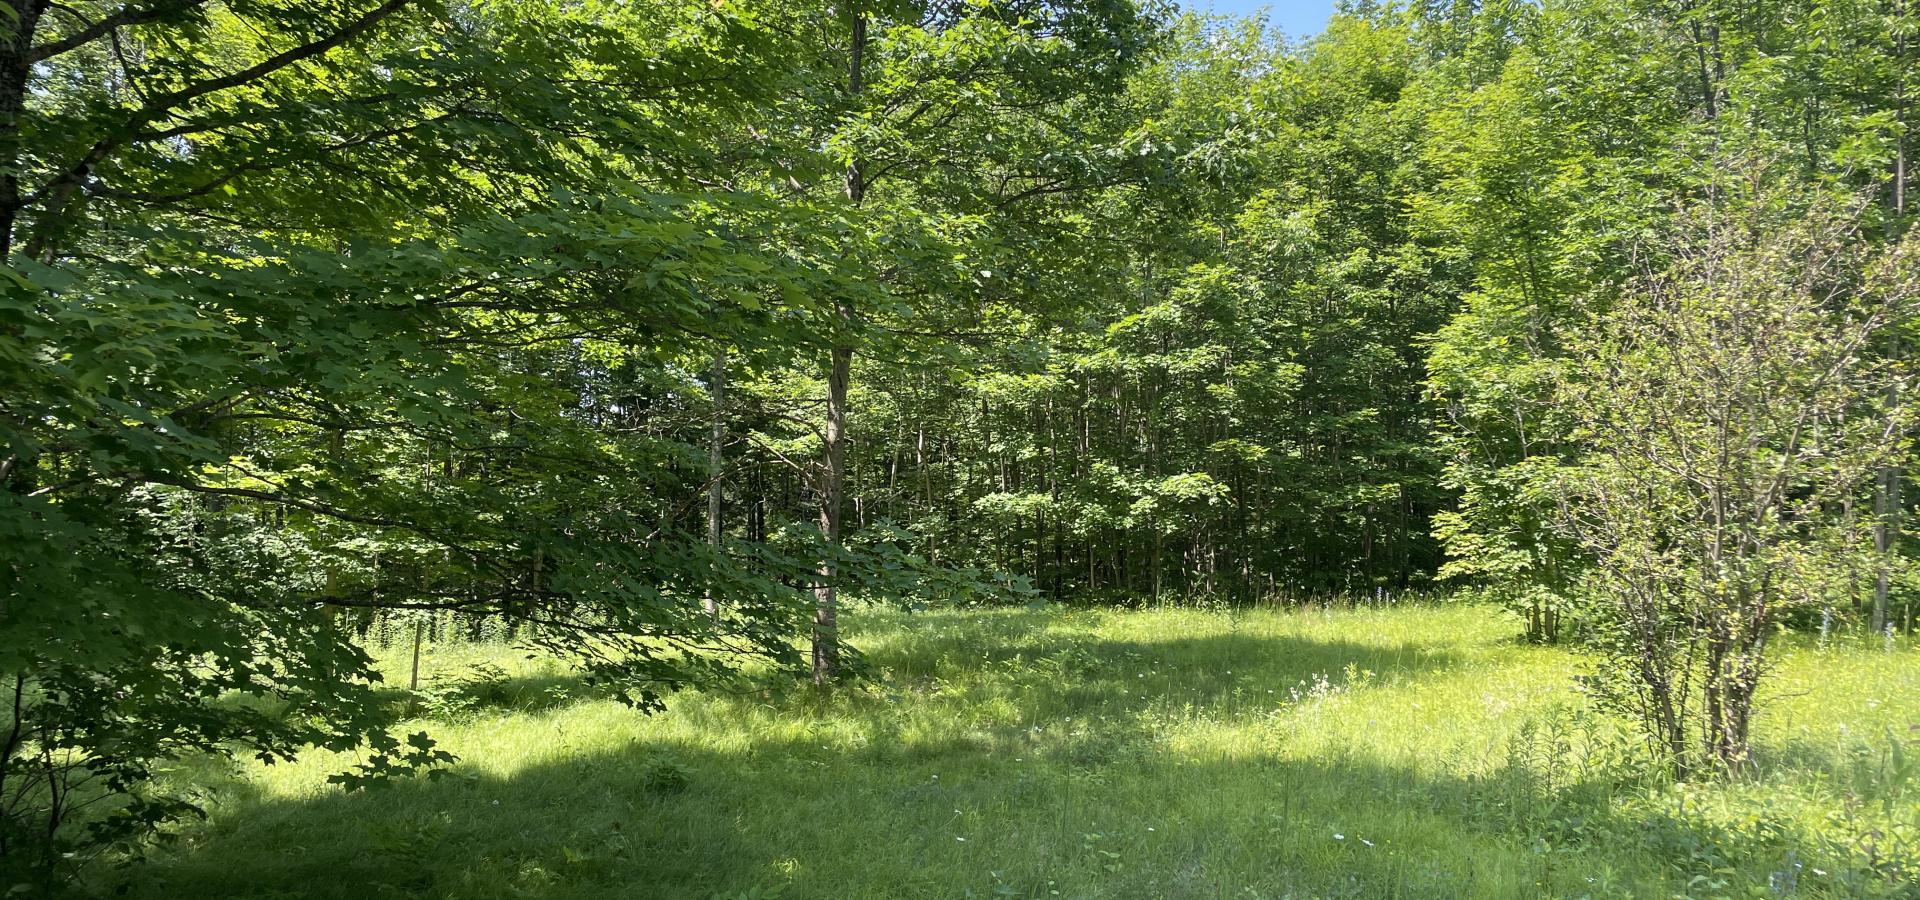 Partially cleared, grassed building lot surrounded by beautiful mature trees.